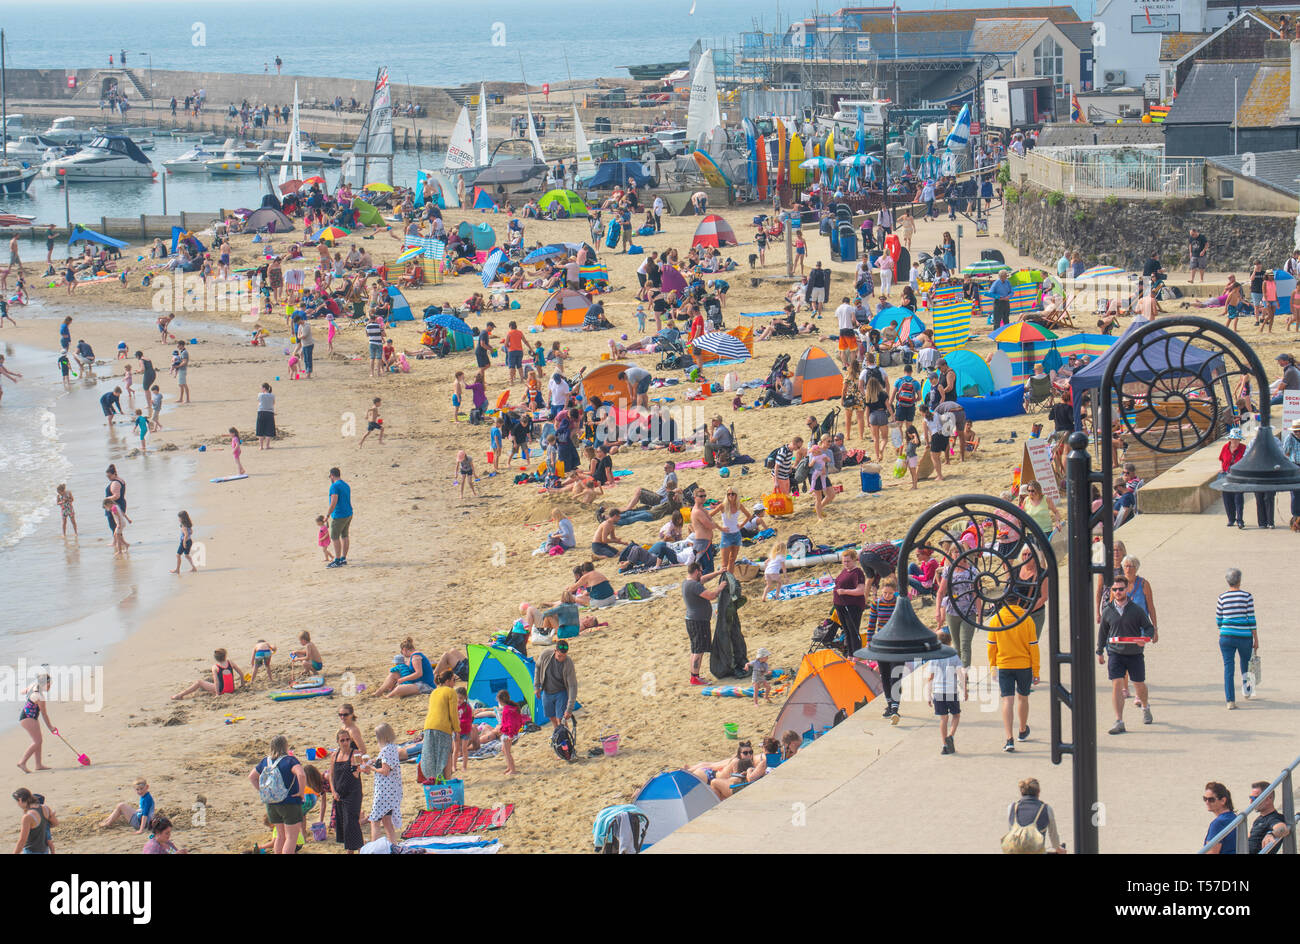 Lyme Regis, Dorset, UK. 22nd April 2019. UK Weather: Holiday makers and beach goers secure a spot early on the pretty beach at the seaside resort of Lyme Regis to enjoy a day of hot and hazy sunshine on the Bank Holiday.  Visitors have enjoyed record breaking heat over the Easter weekend with temperatures set to soar even further today. Credit: Celia McMahon/Alamy Live News. Stock Photo